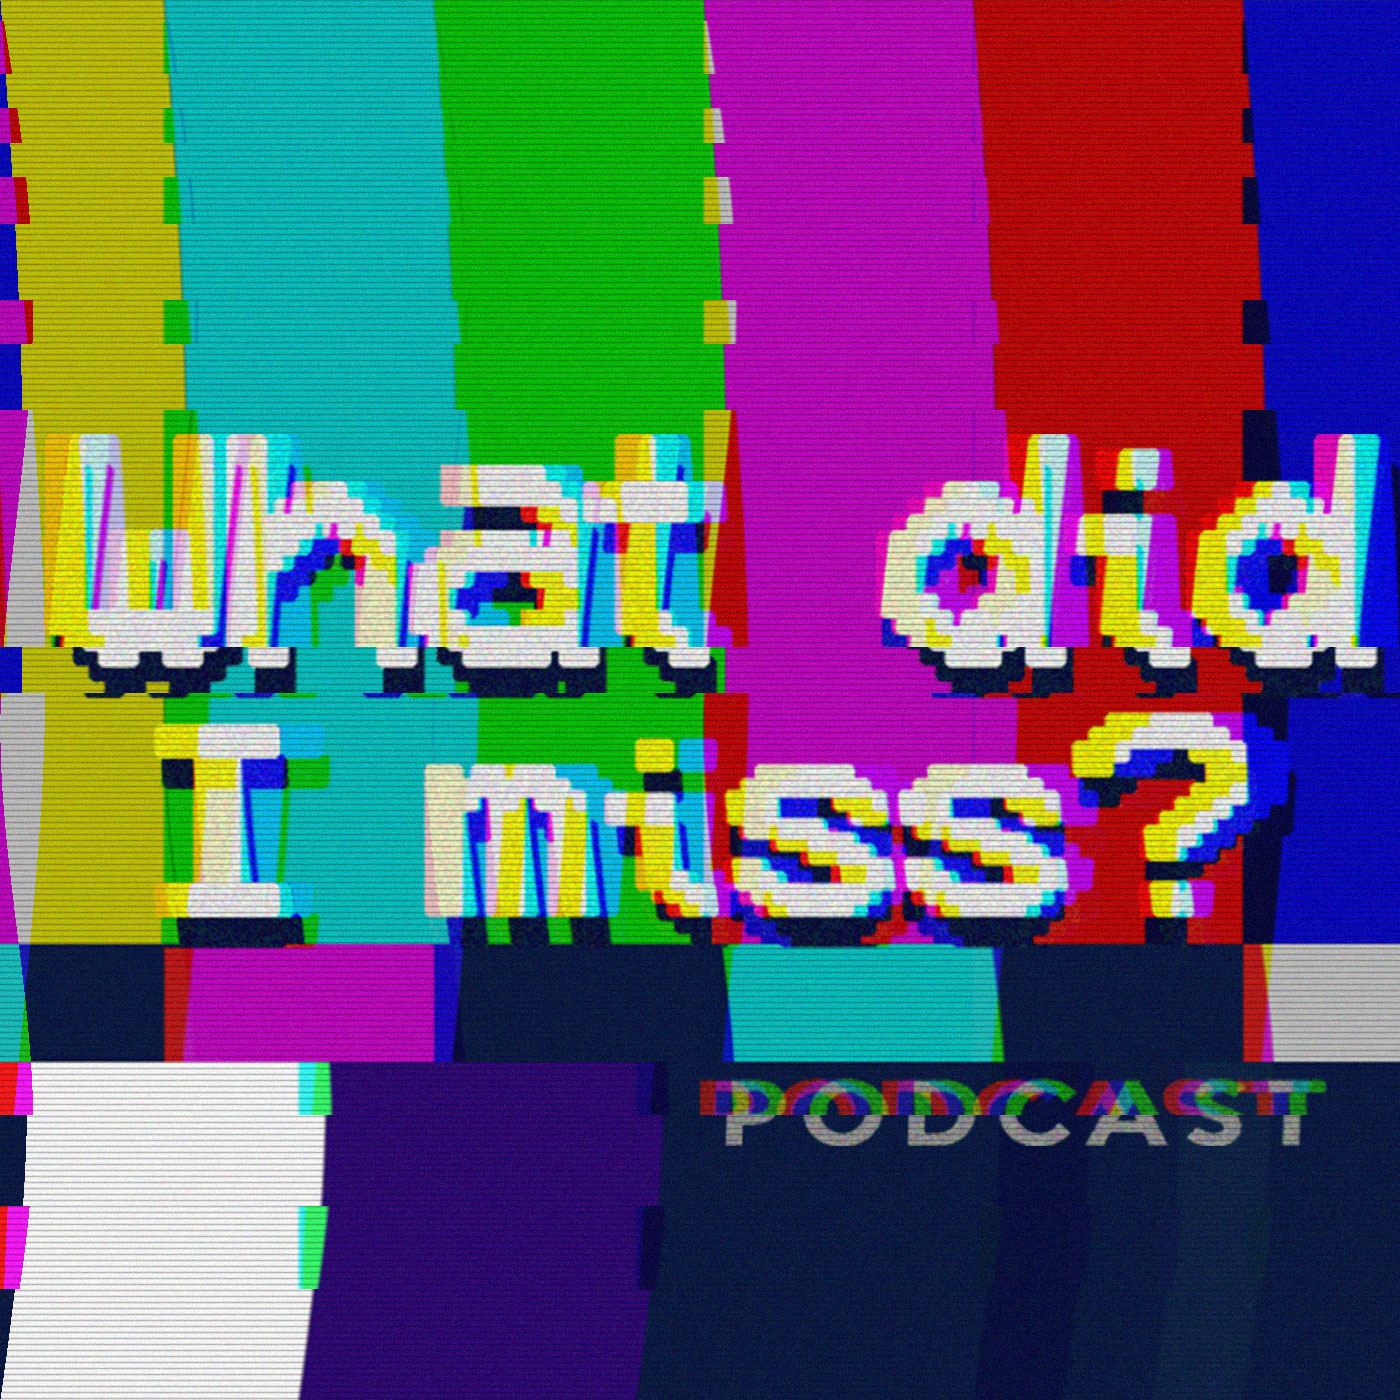 What Did I Miss? podcast show image